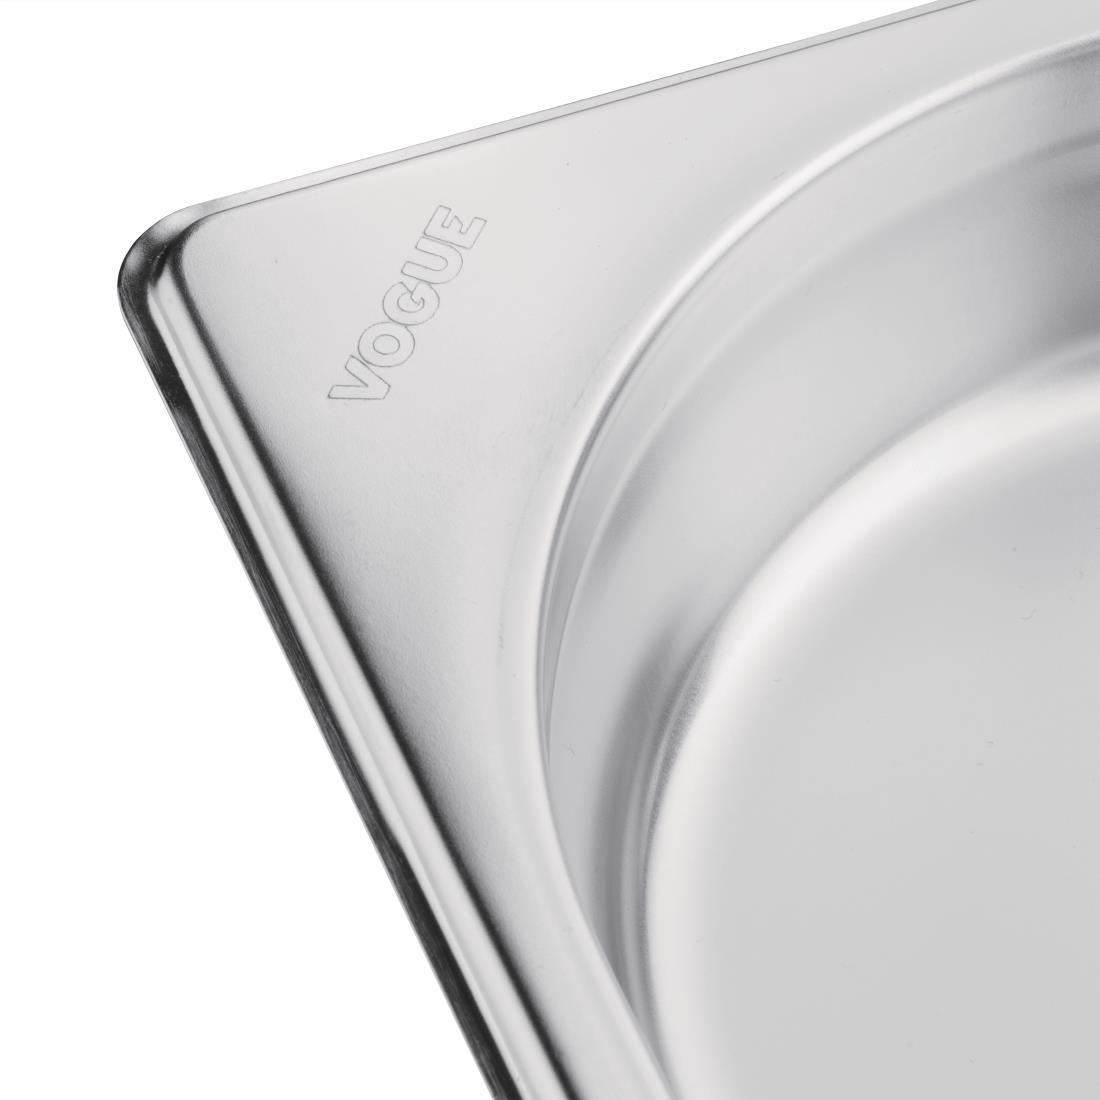 Vogue Stainless Steel 1/1 Gastronorm Pan 40mm - K994  - 6